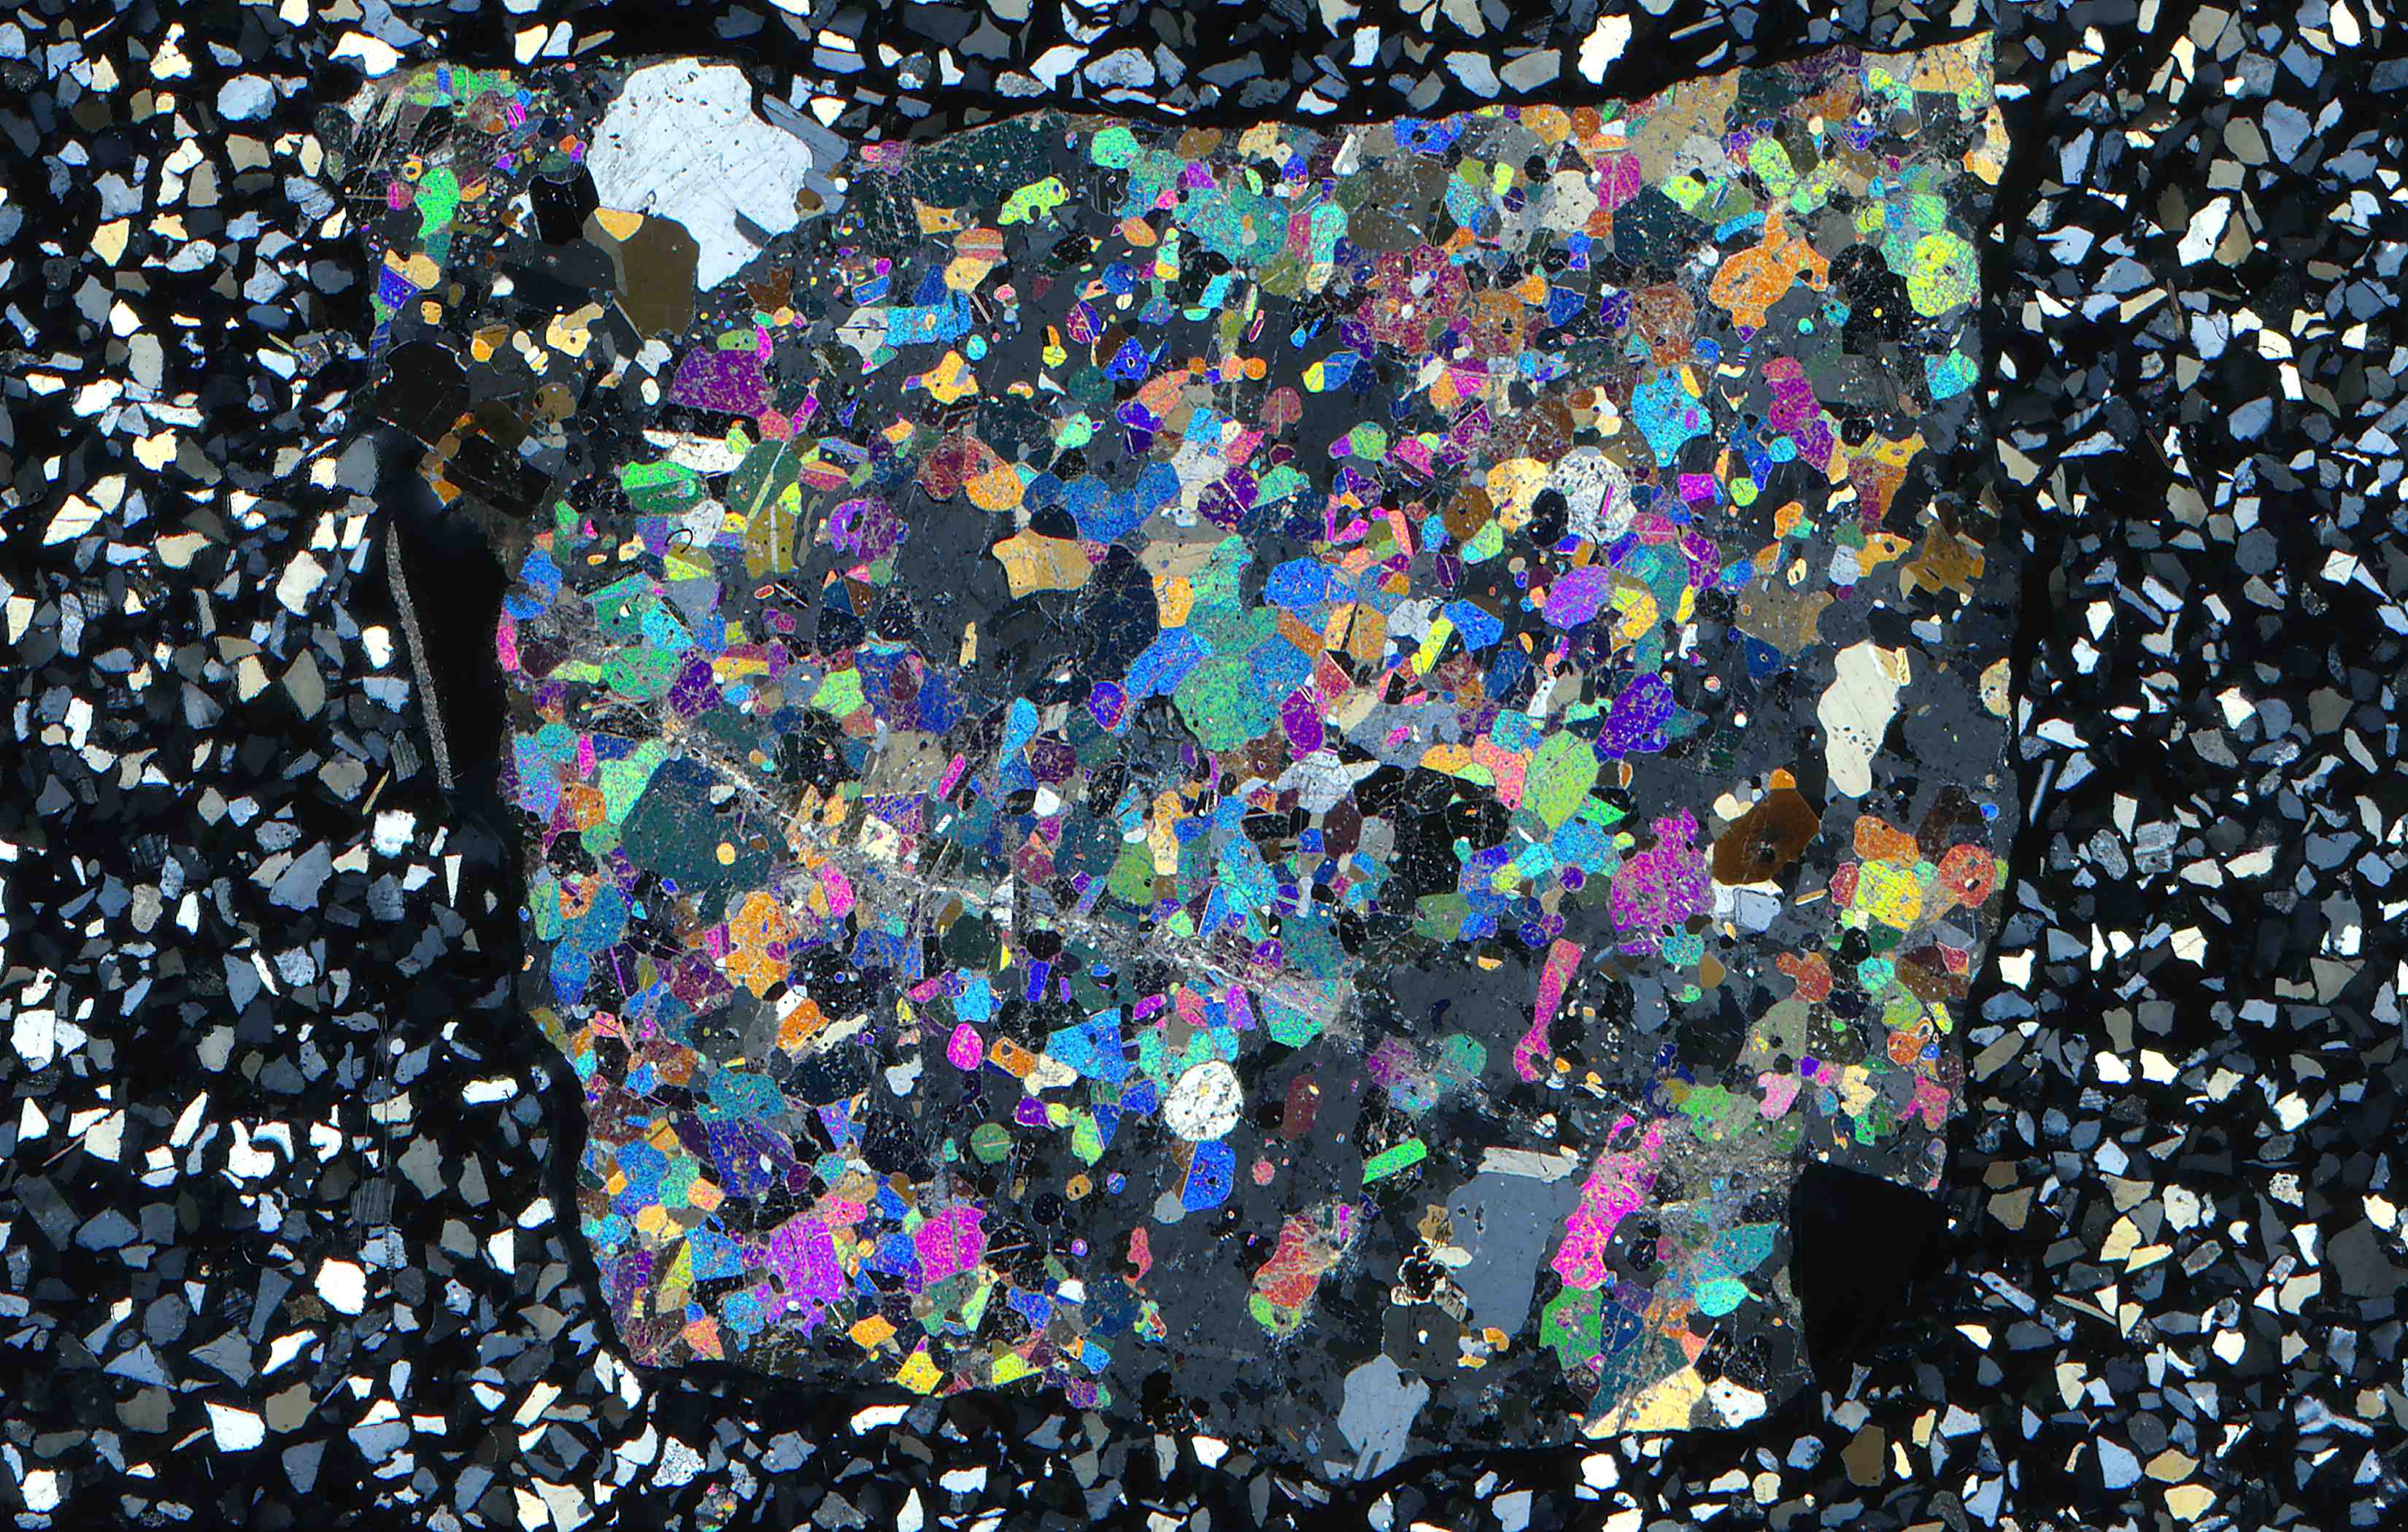 Fuka mine Japan hillebrandtite and spurrite in thin section